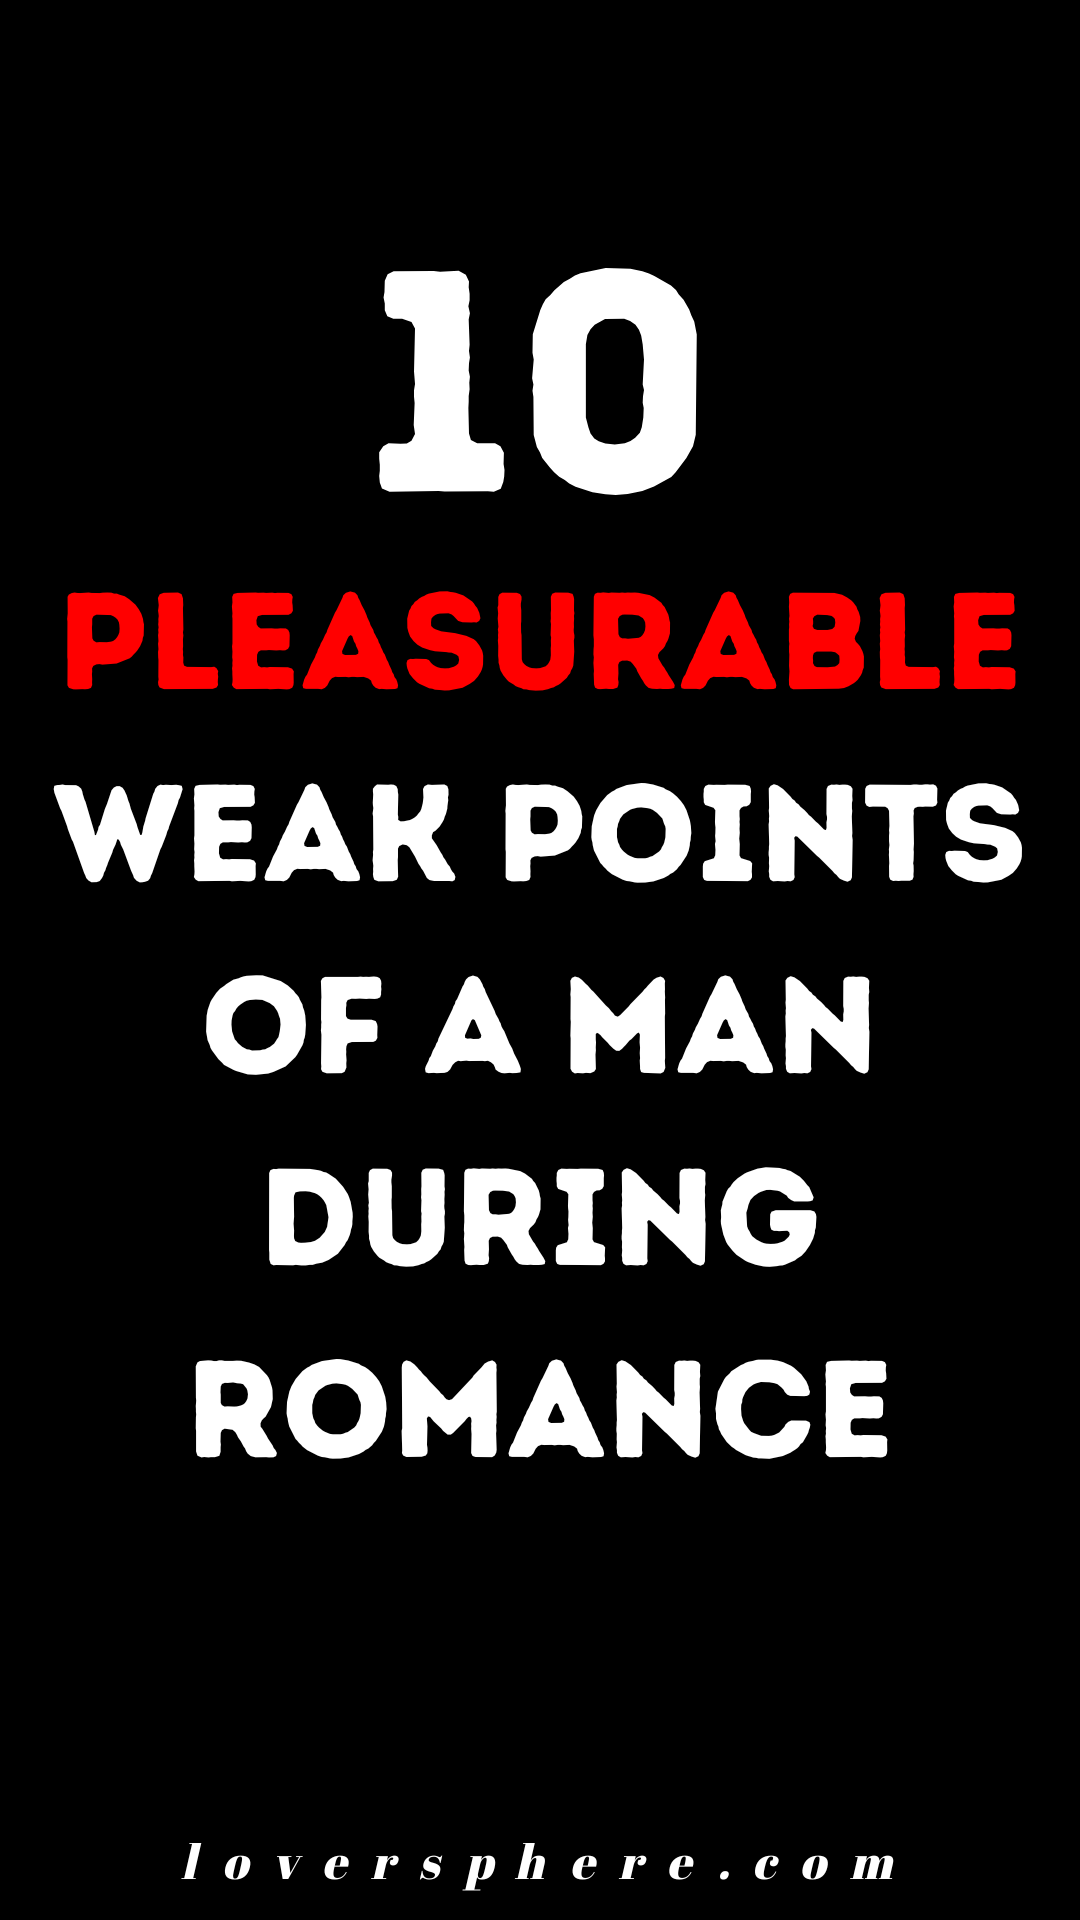 weak points of a man during romance